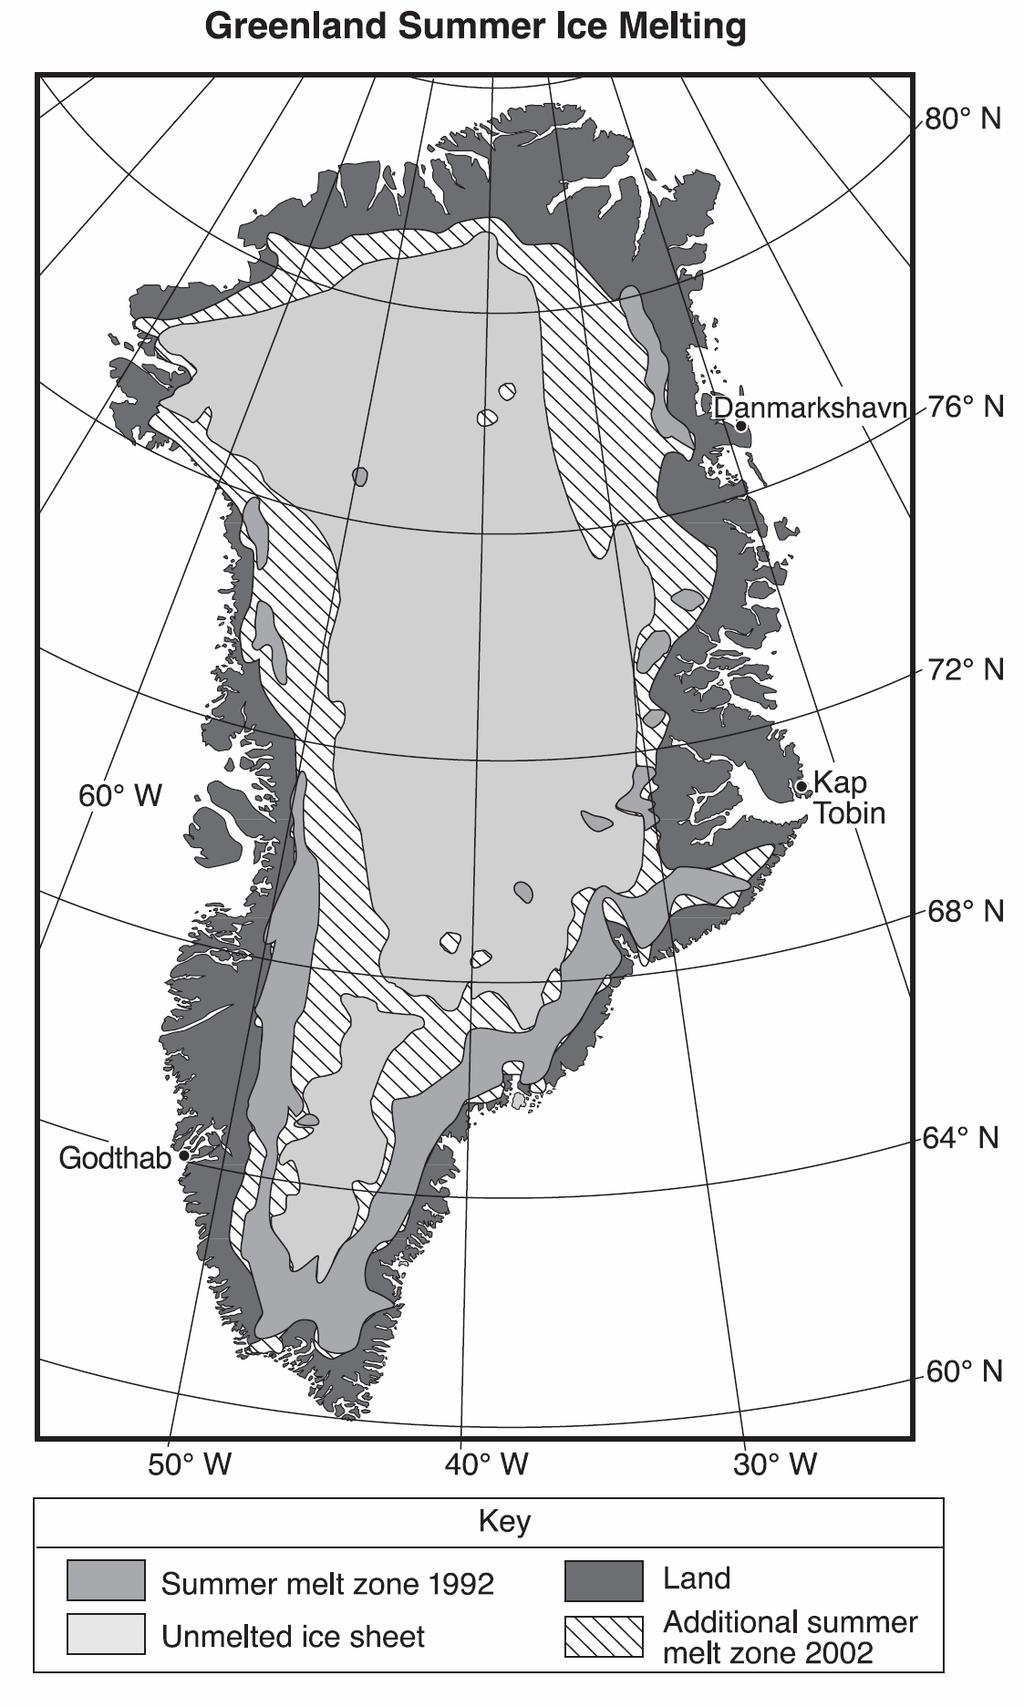 29. Base your answer to the following question on the following map and passage. The map shows the extent of summer ice-melt zones on Greenland in 1992 and 2002.